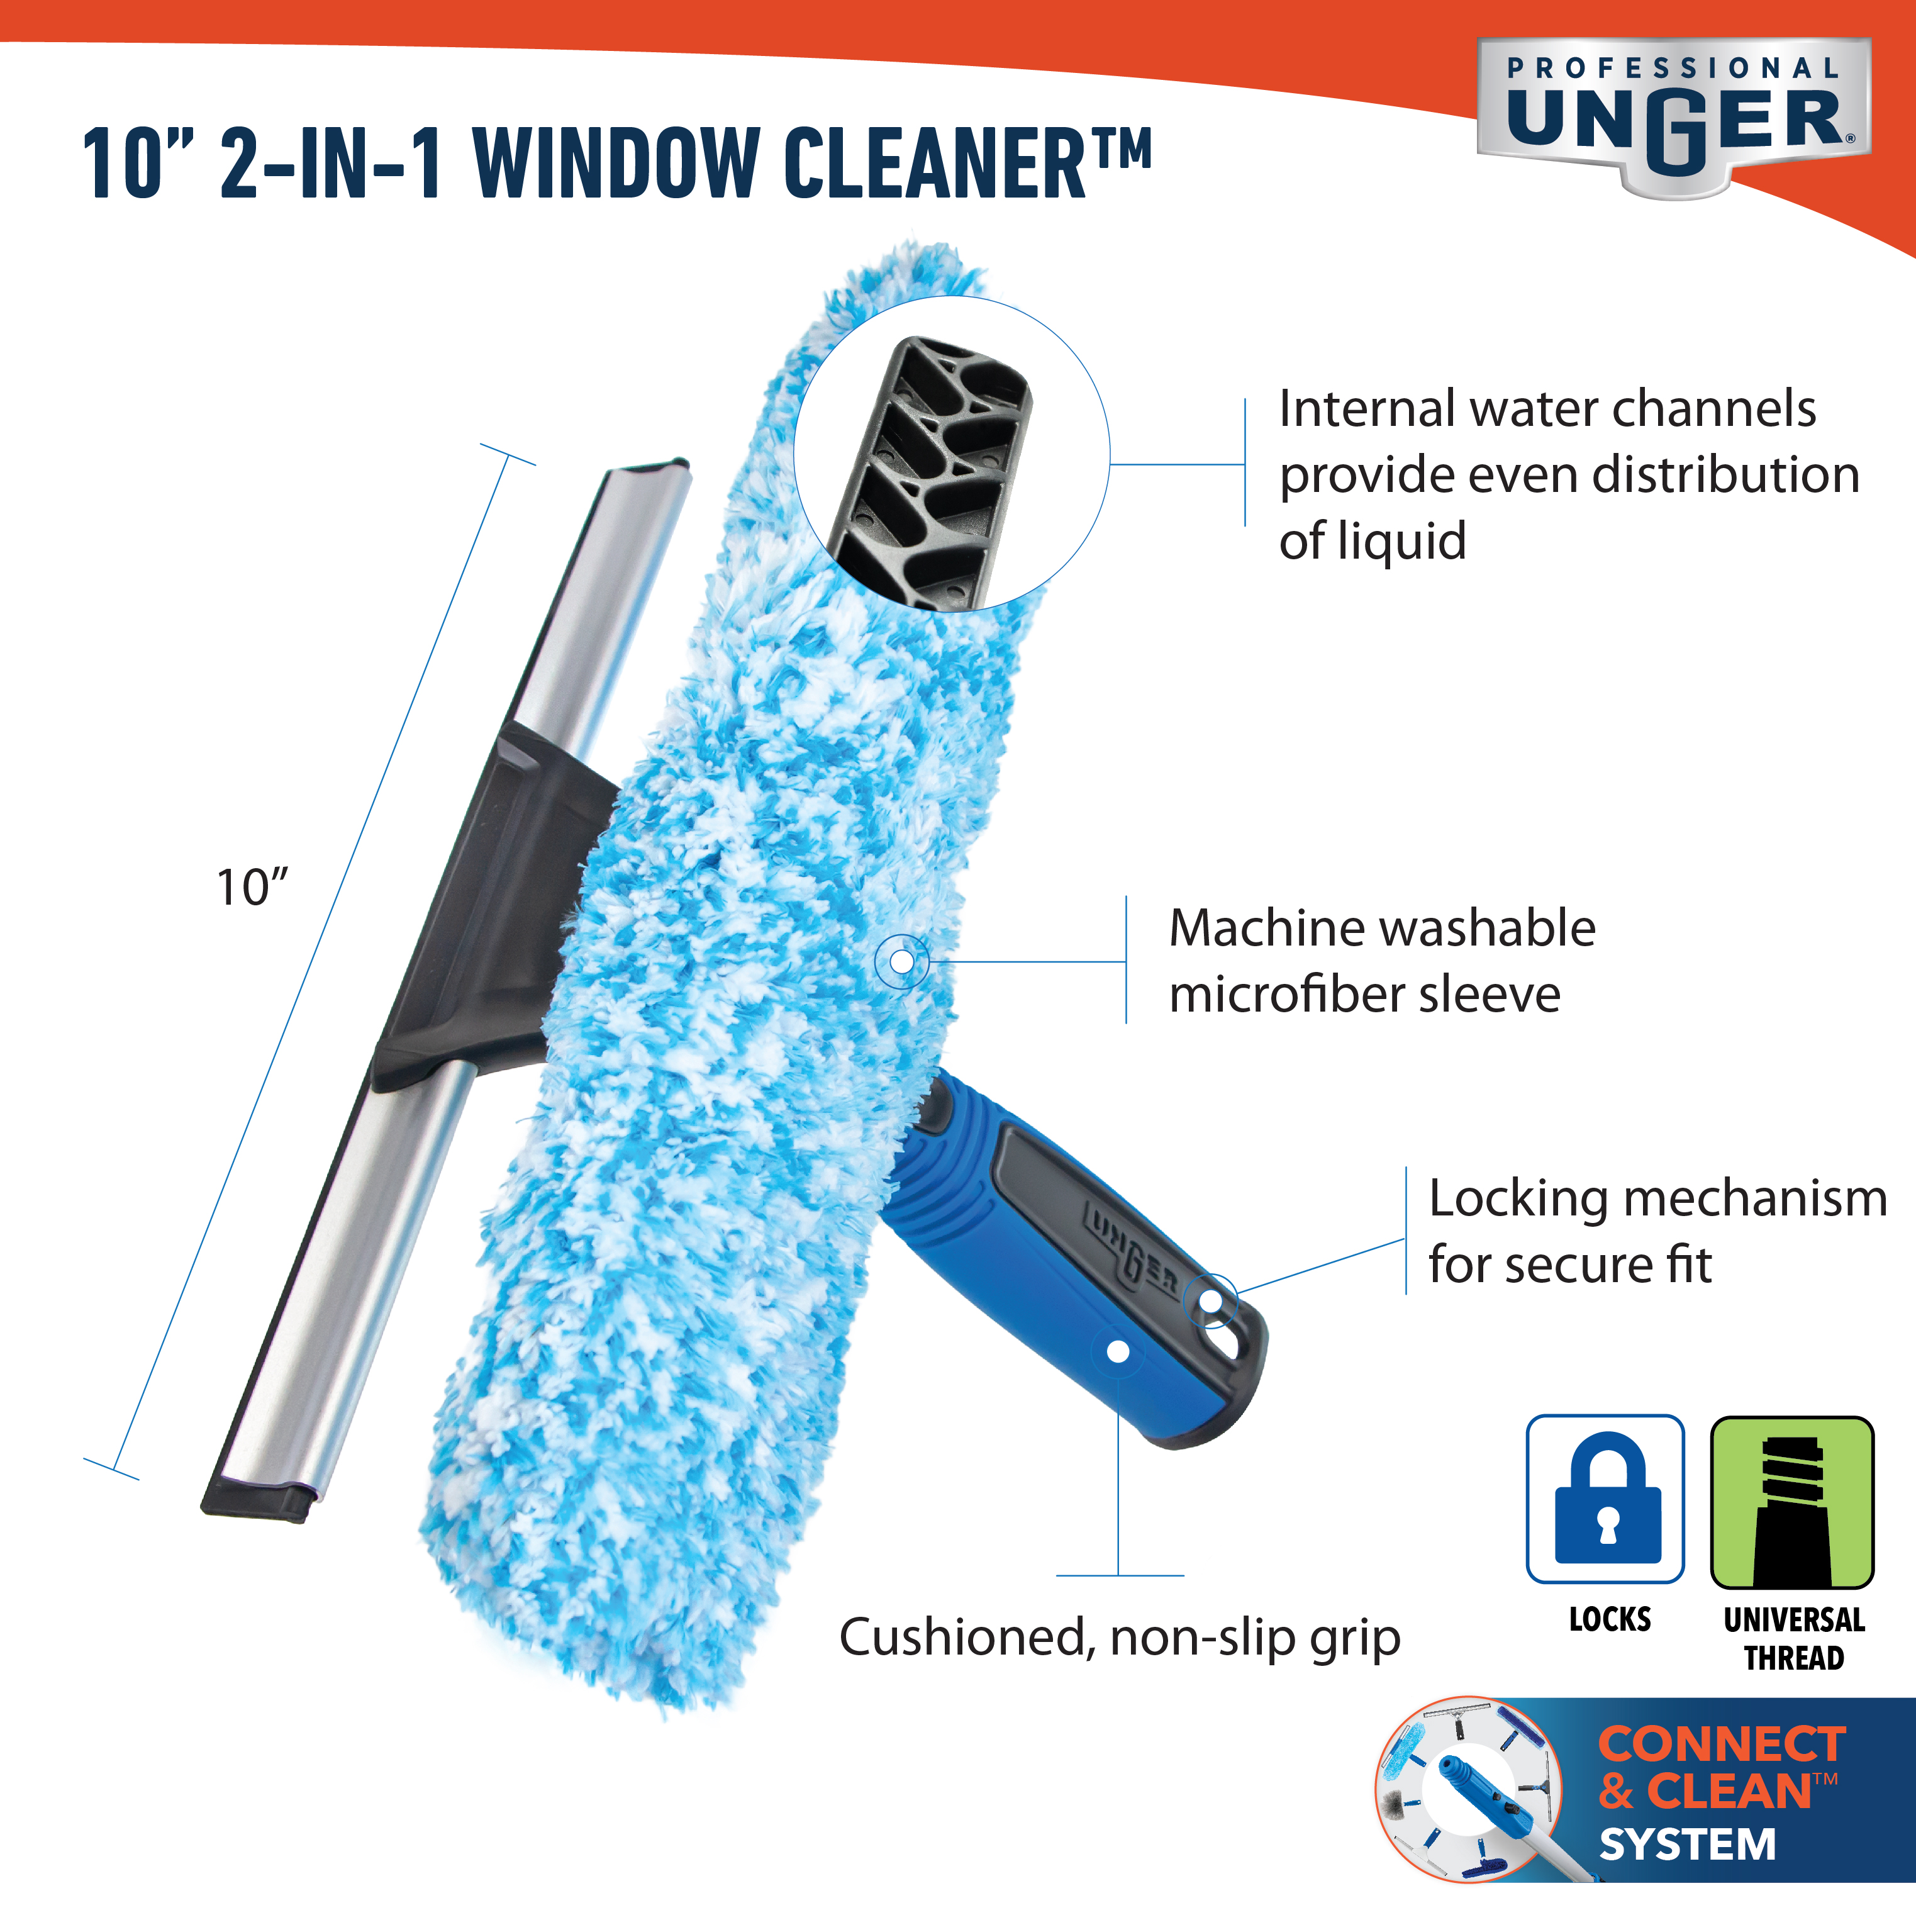 981620_UI_Unger Pro_10 inch 2-in-1 Window Cleaner_Infographics 1